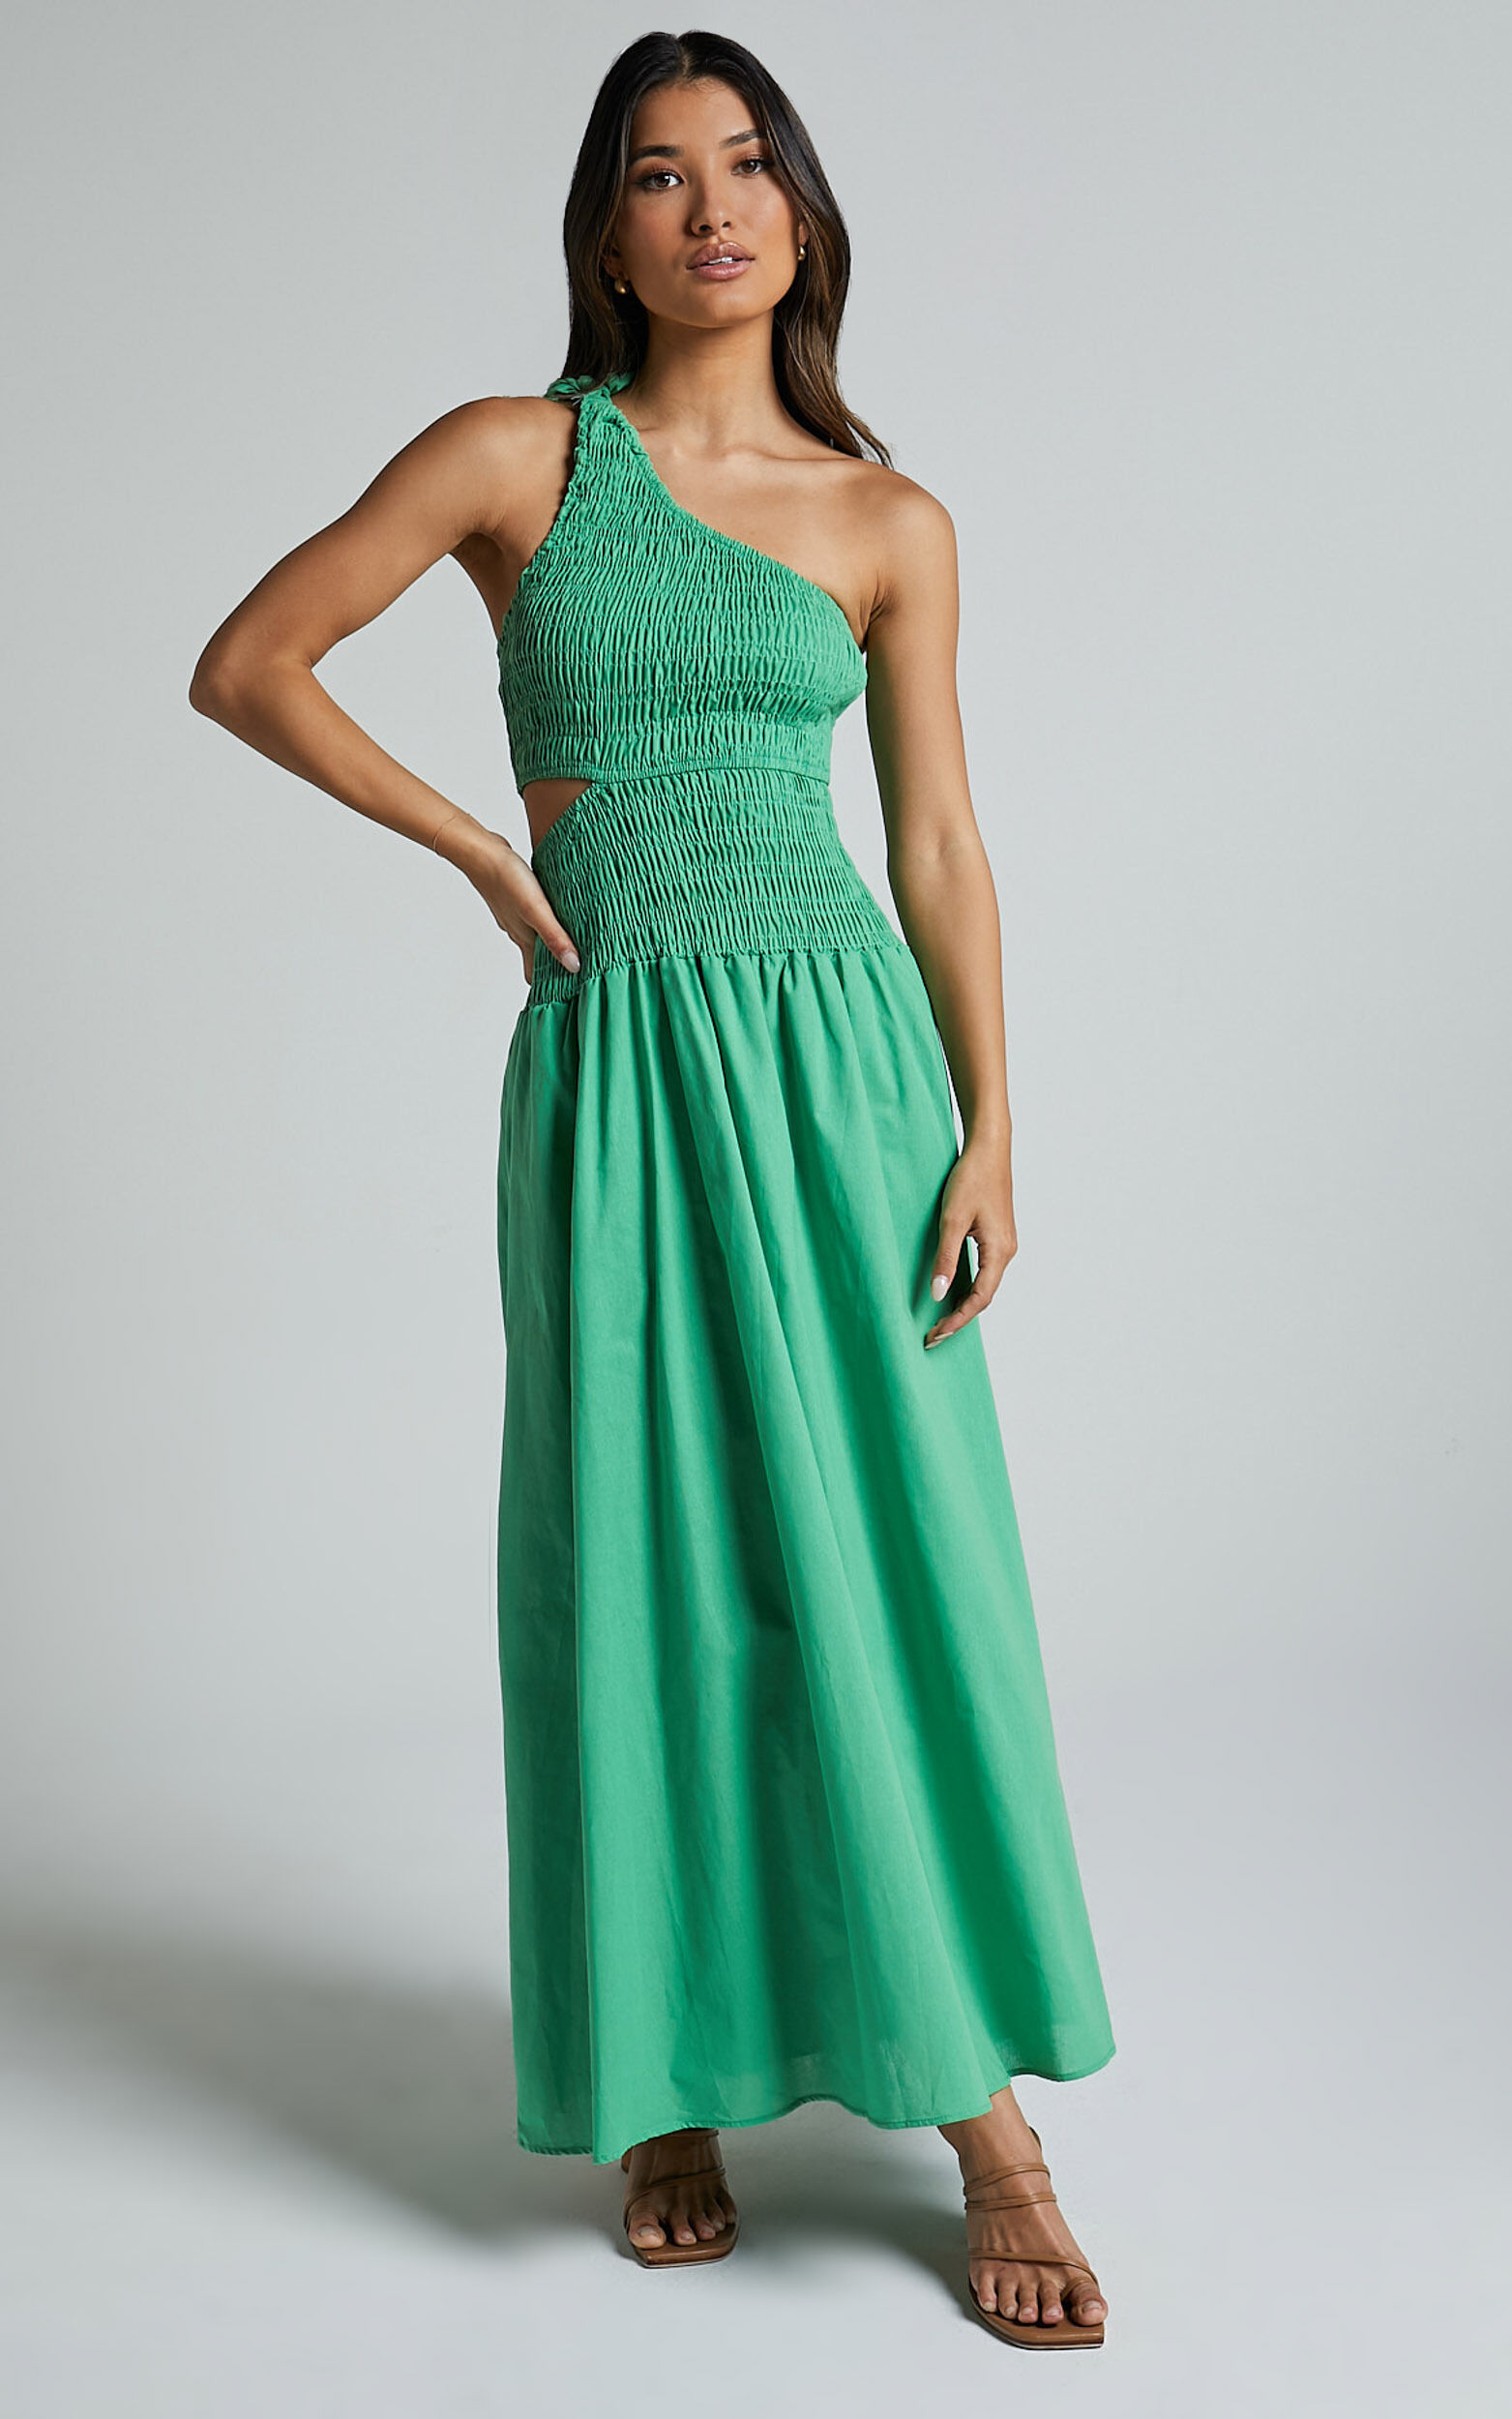 Larose Midi Dress - One Shoulder Tie Side Cut Out Dress Fit and Flare Dress in Green - 06, GRN1